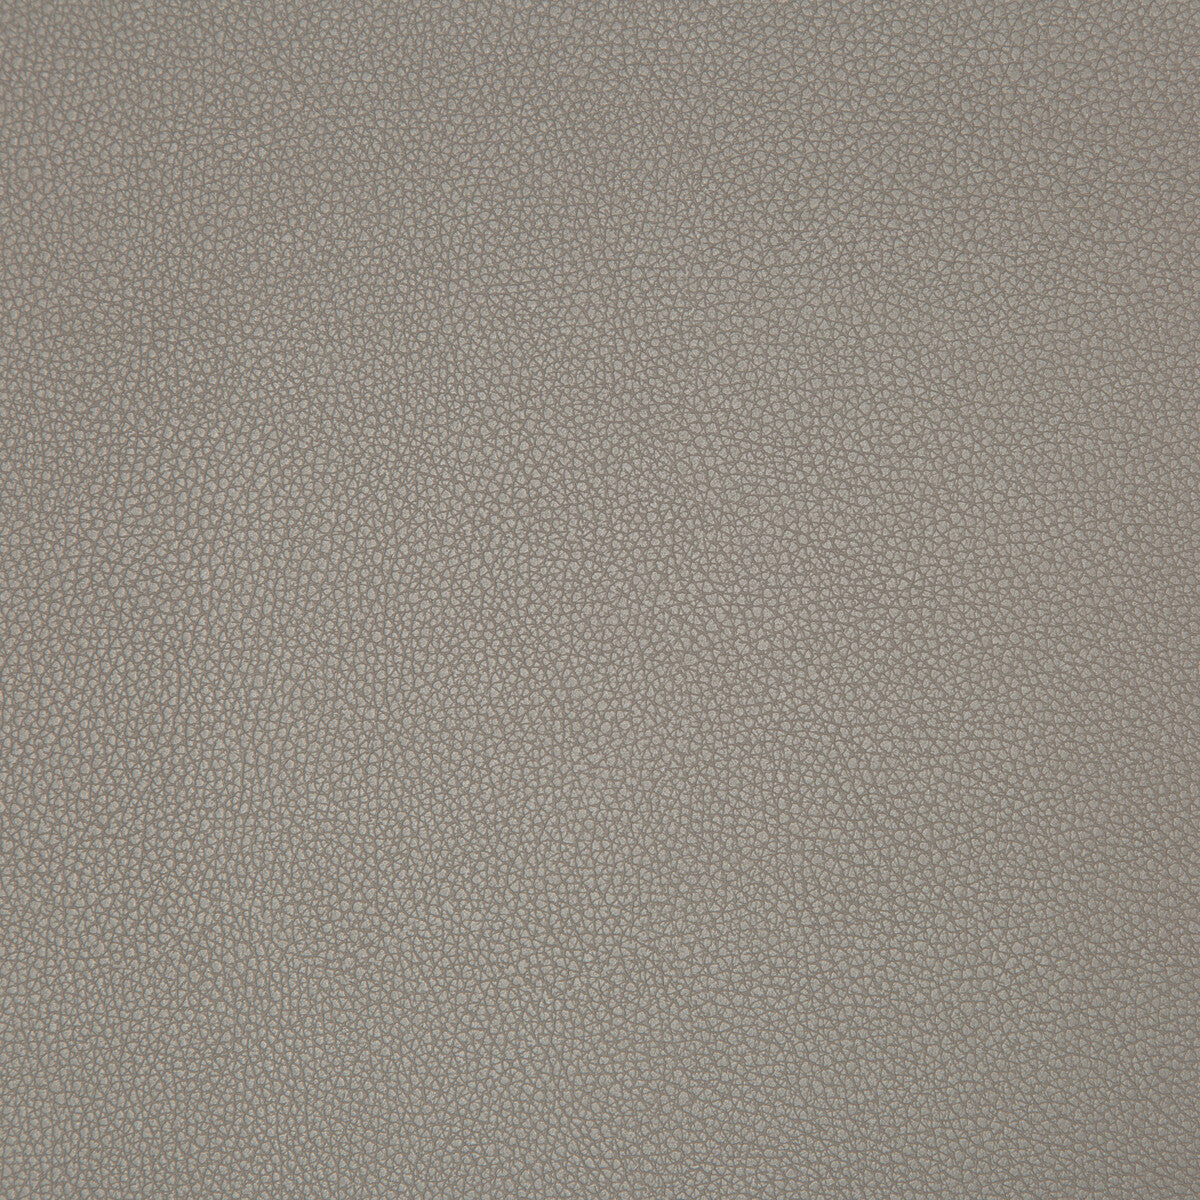 Syrus fabric in truffle color - pattern SYRUS.2106.0 - by Kravet Contract